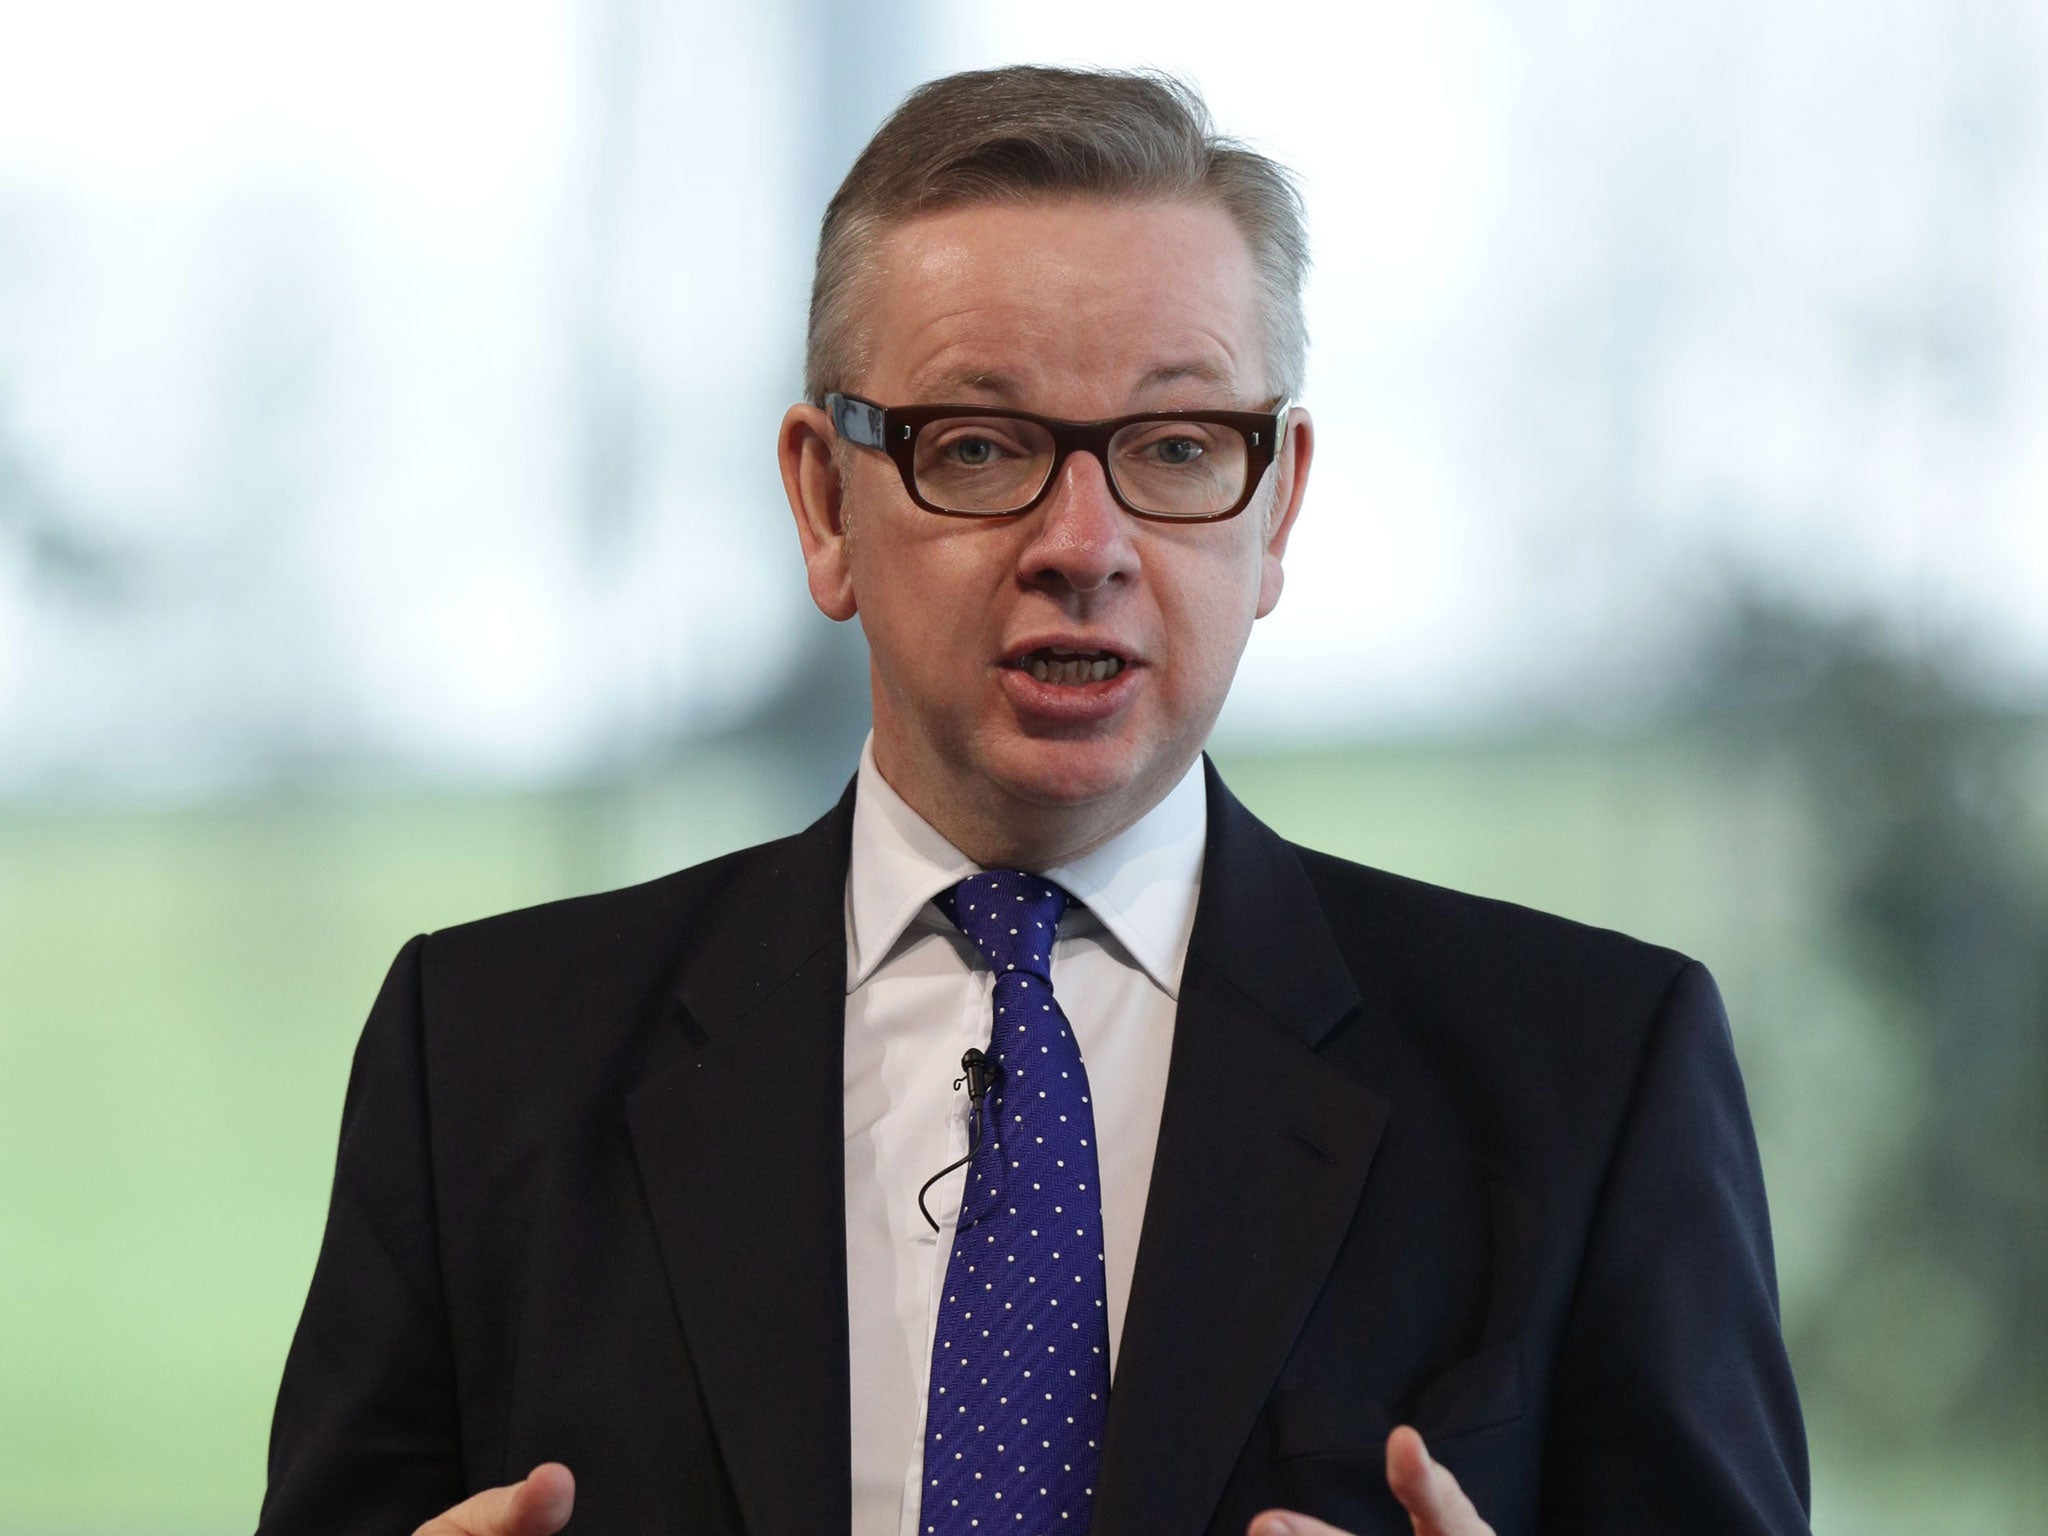 Free schools are championed by Michael Gove